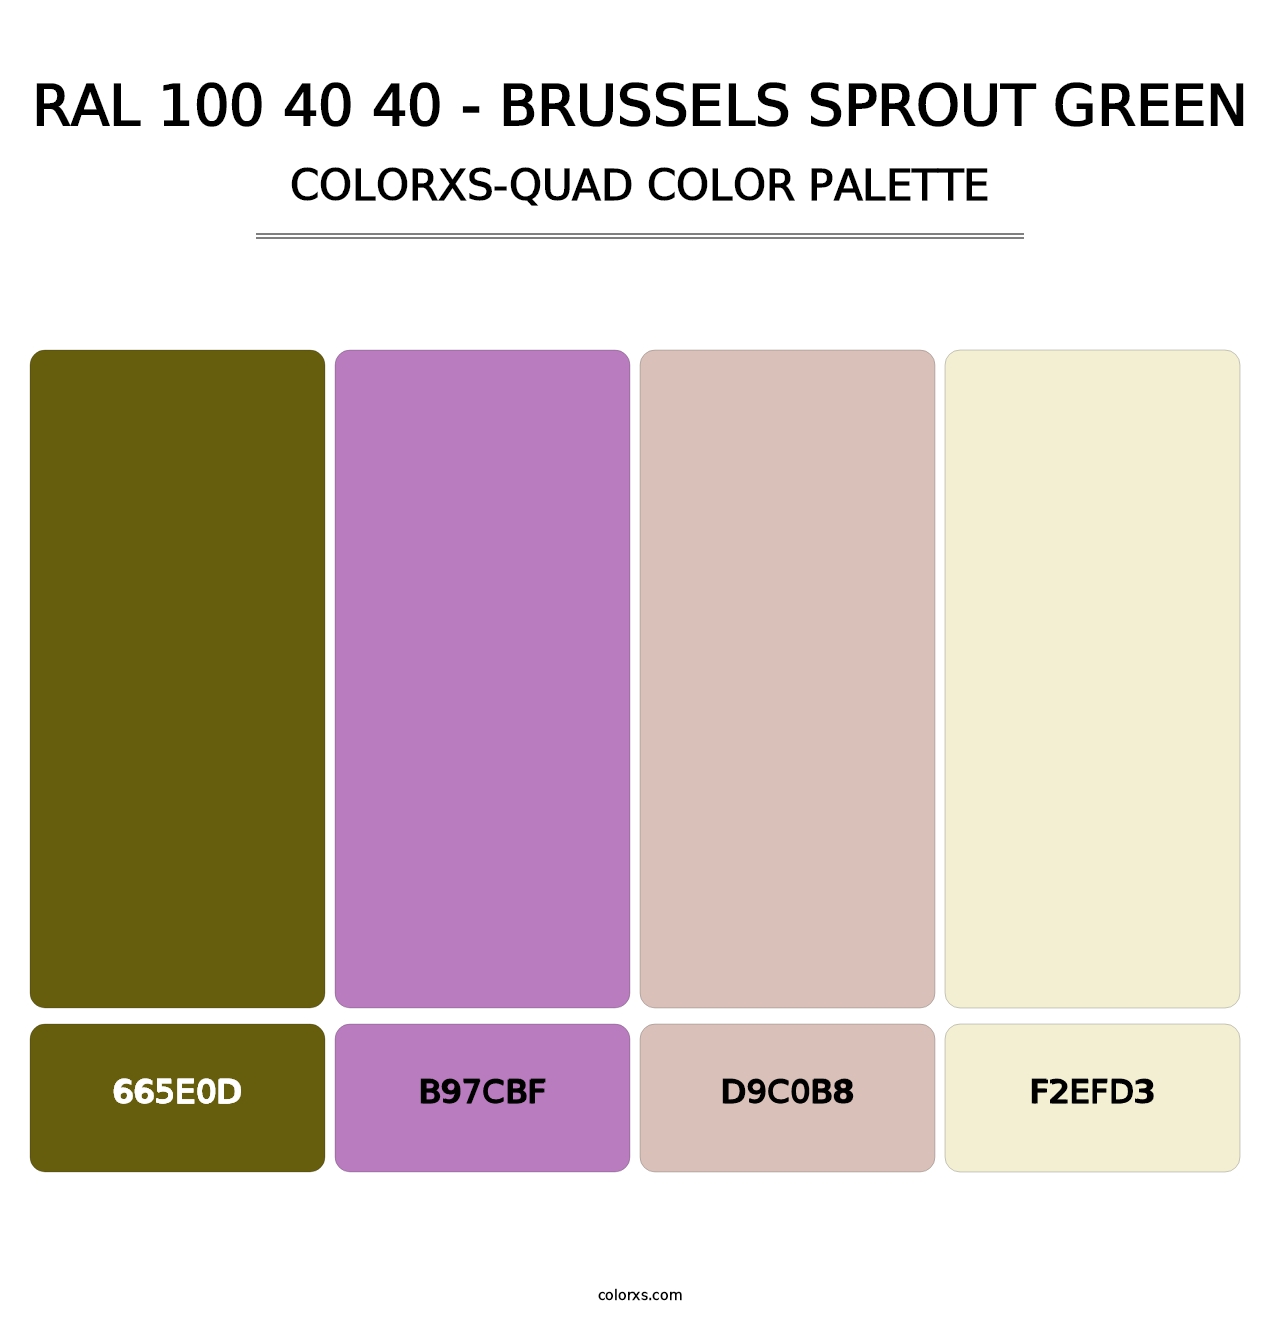 RAL 100 40 40 - Brussels Sprout Green - Colorxs Quad Palette